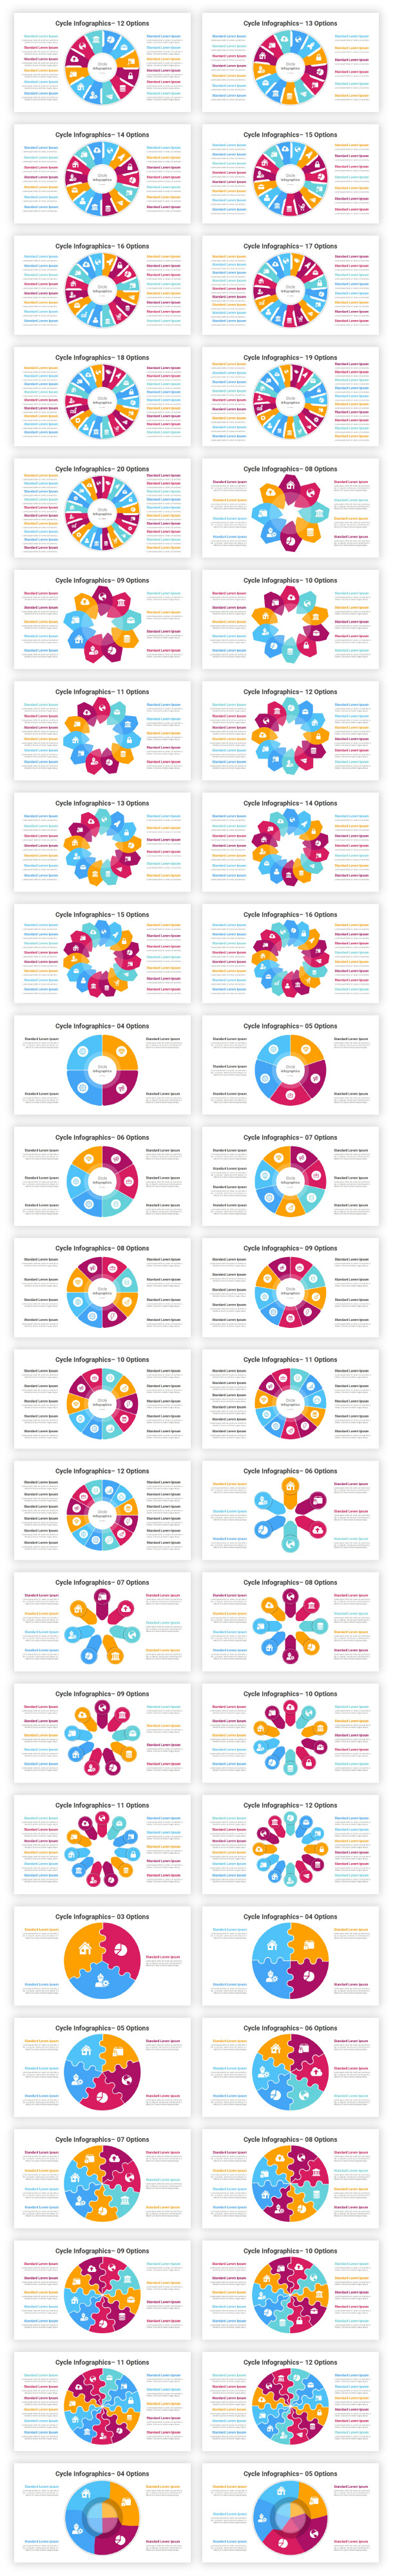 Cycle Infographics Google Slides Diagrams Template - 2